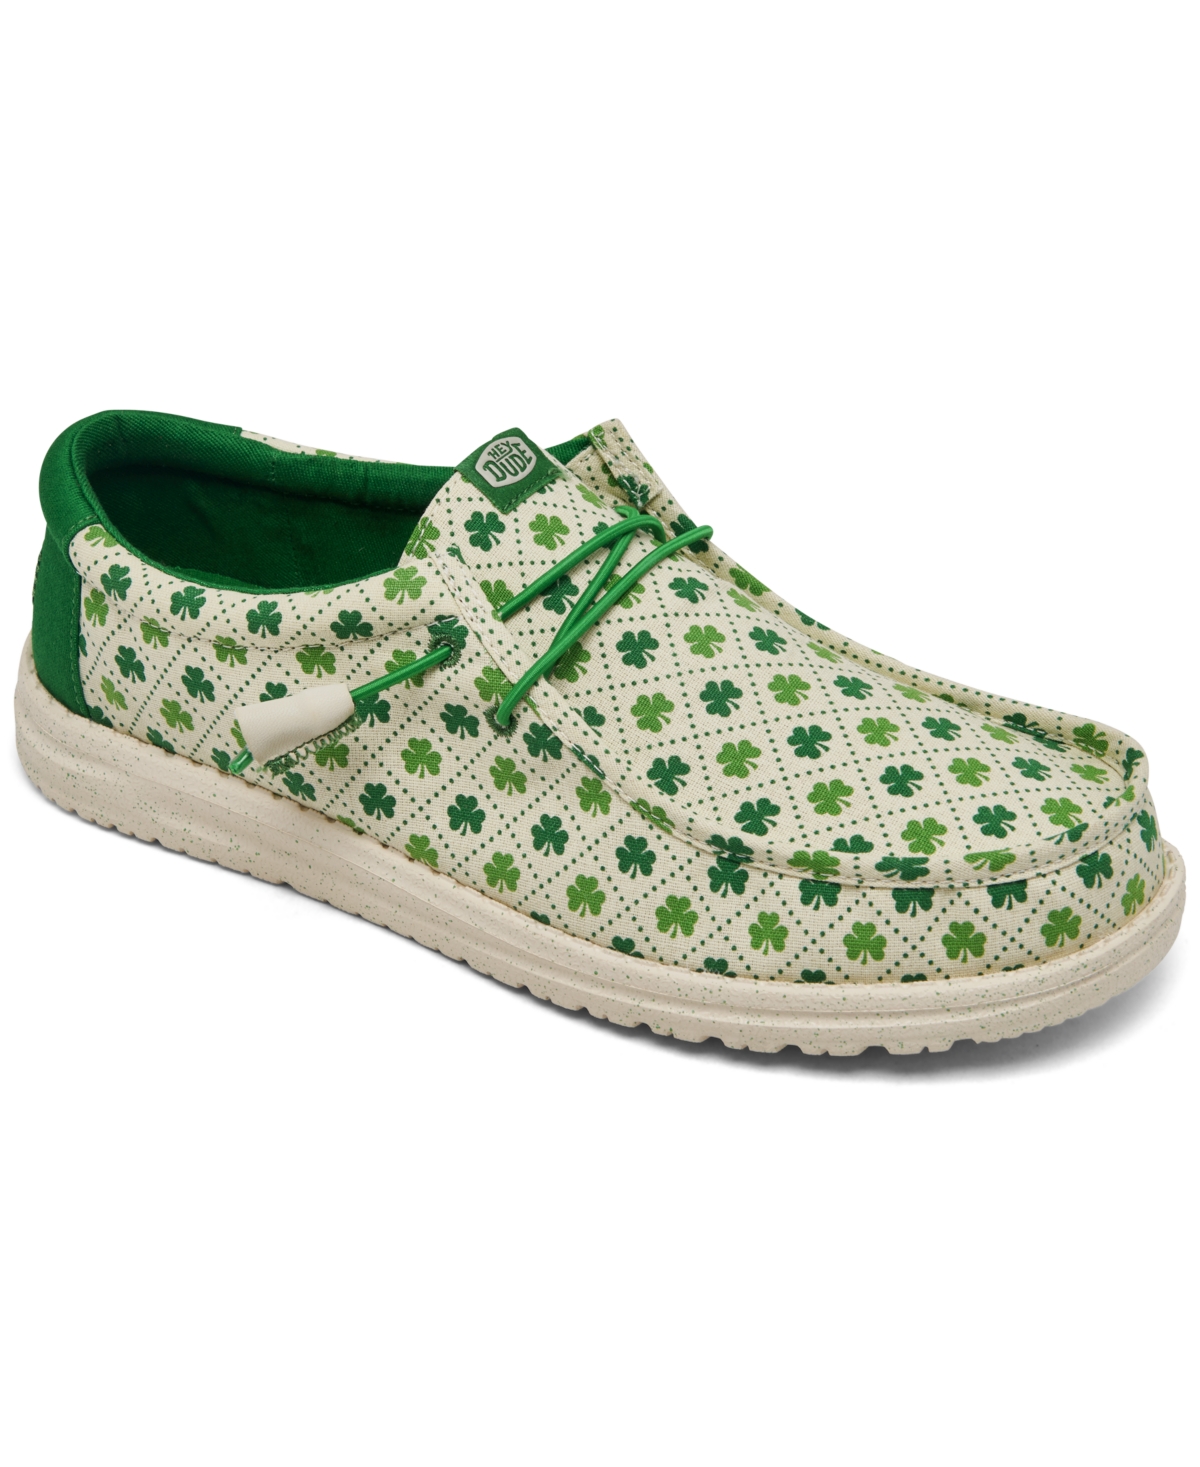 Men's Wally Luck Shamrock Print Casual Moccasin Slip-On Sneakers from Finish Line - Shamrock